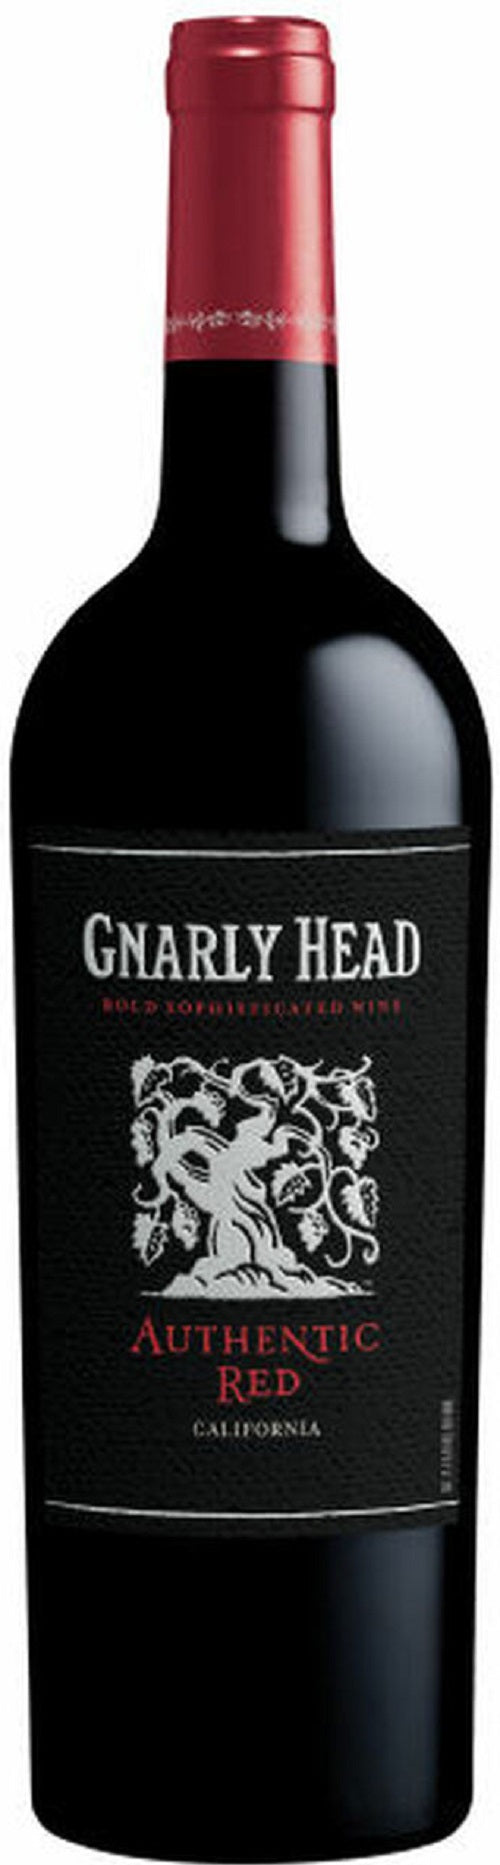 Gnarly Head Authentic Red 2019